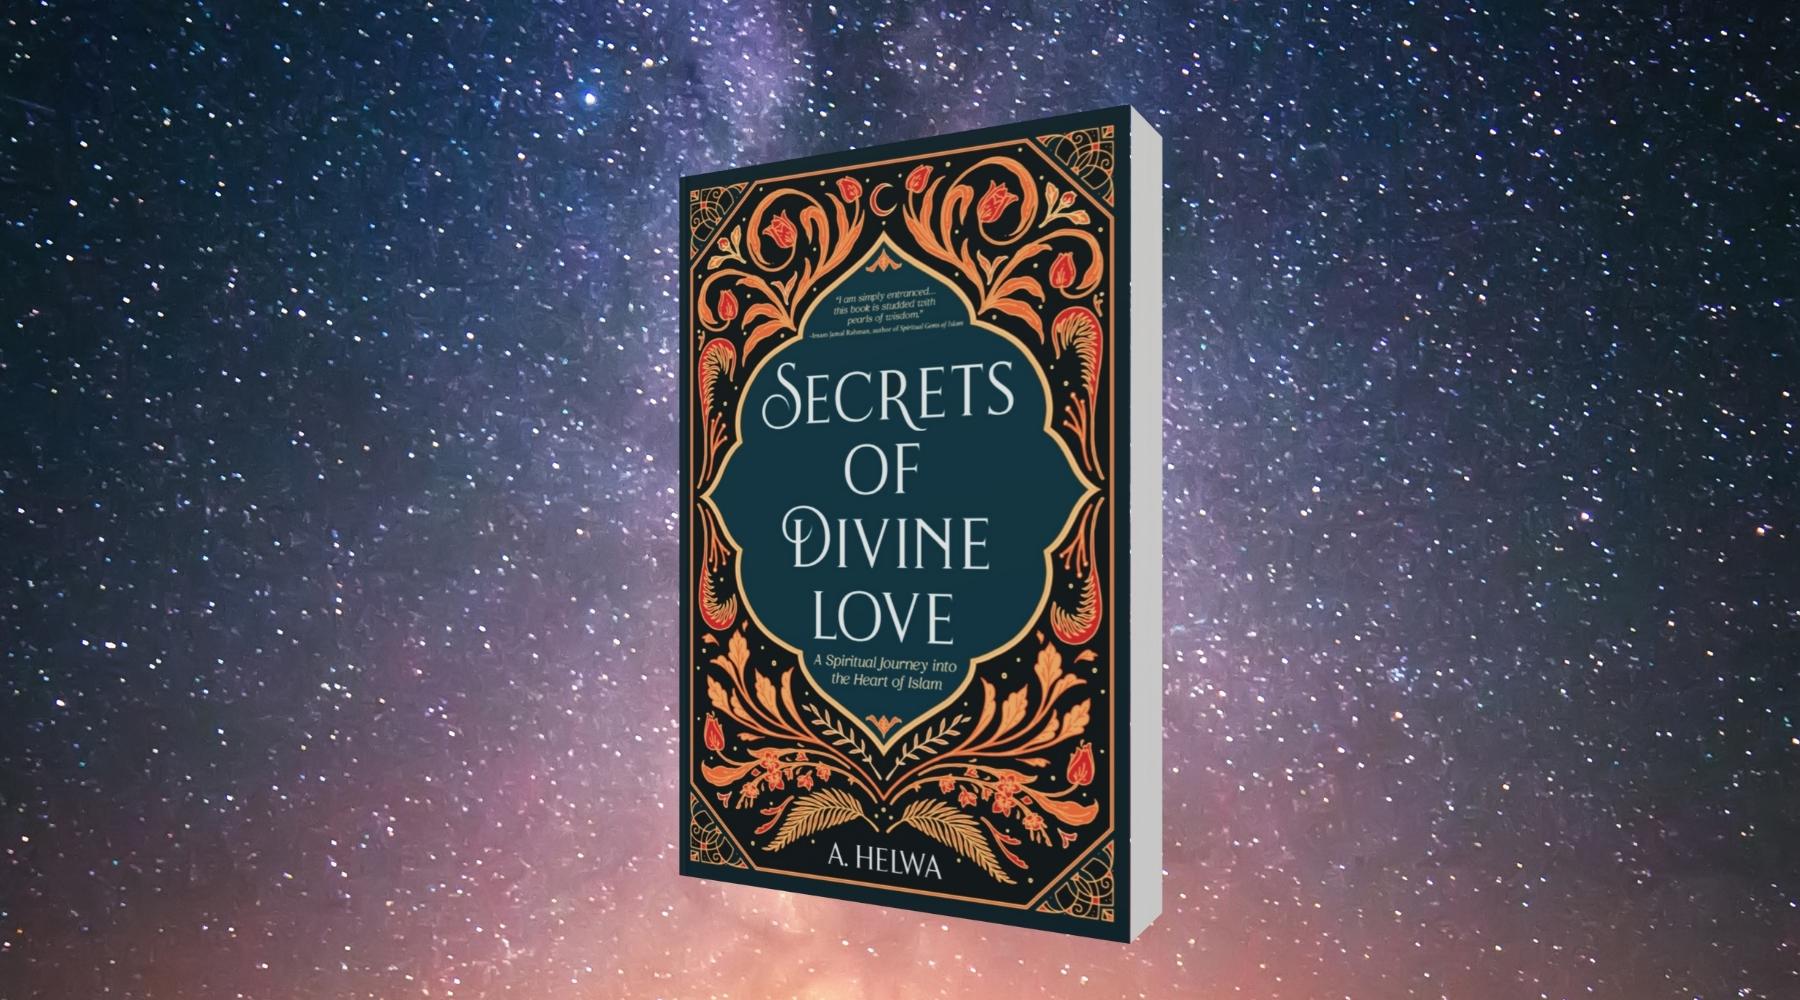 What to Read After "Secrets of Divine Love"